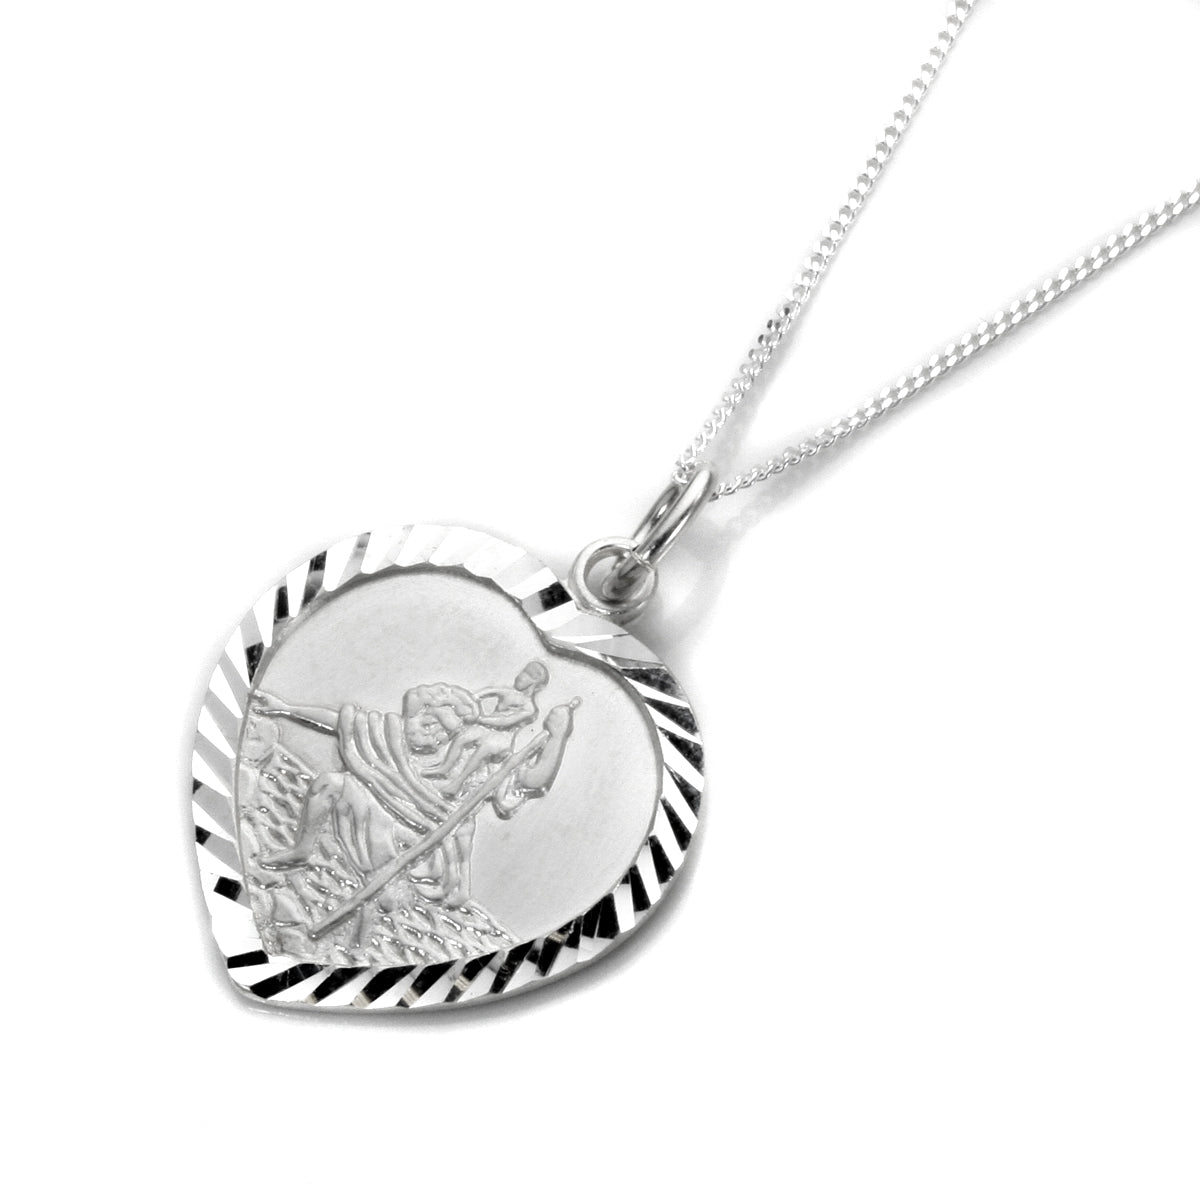 Personalised Sterling Silver St christopher Heart Necklace 14 - 32 Inches